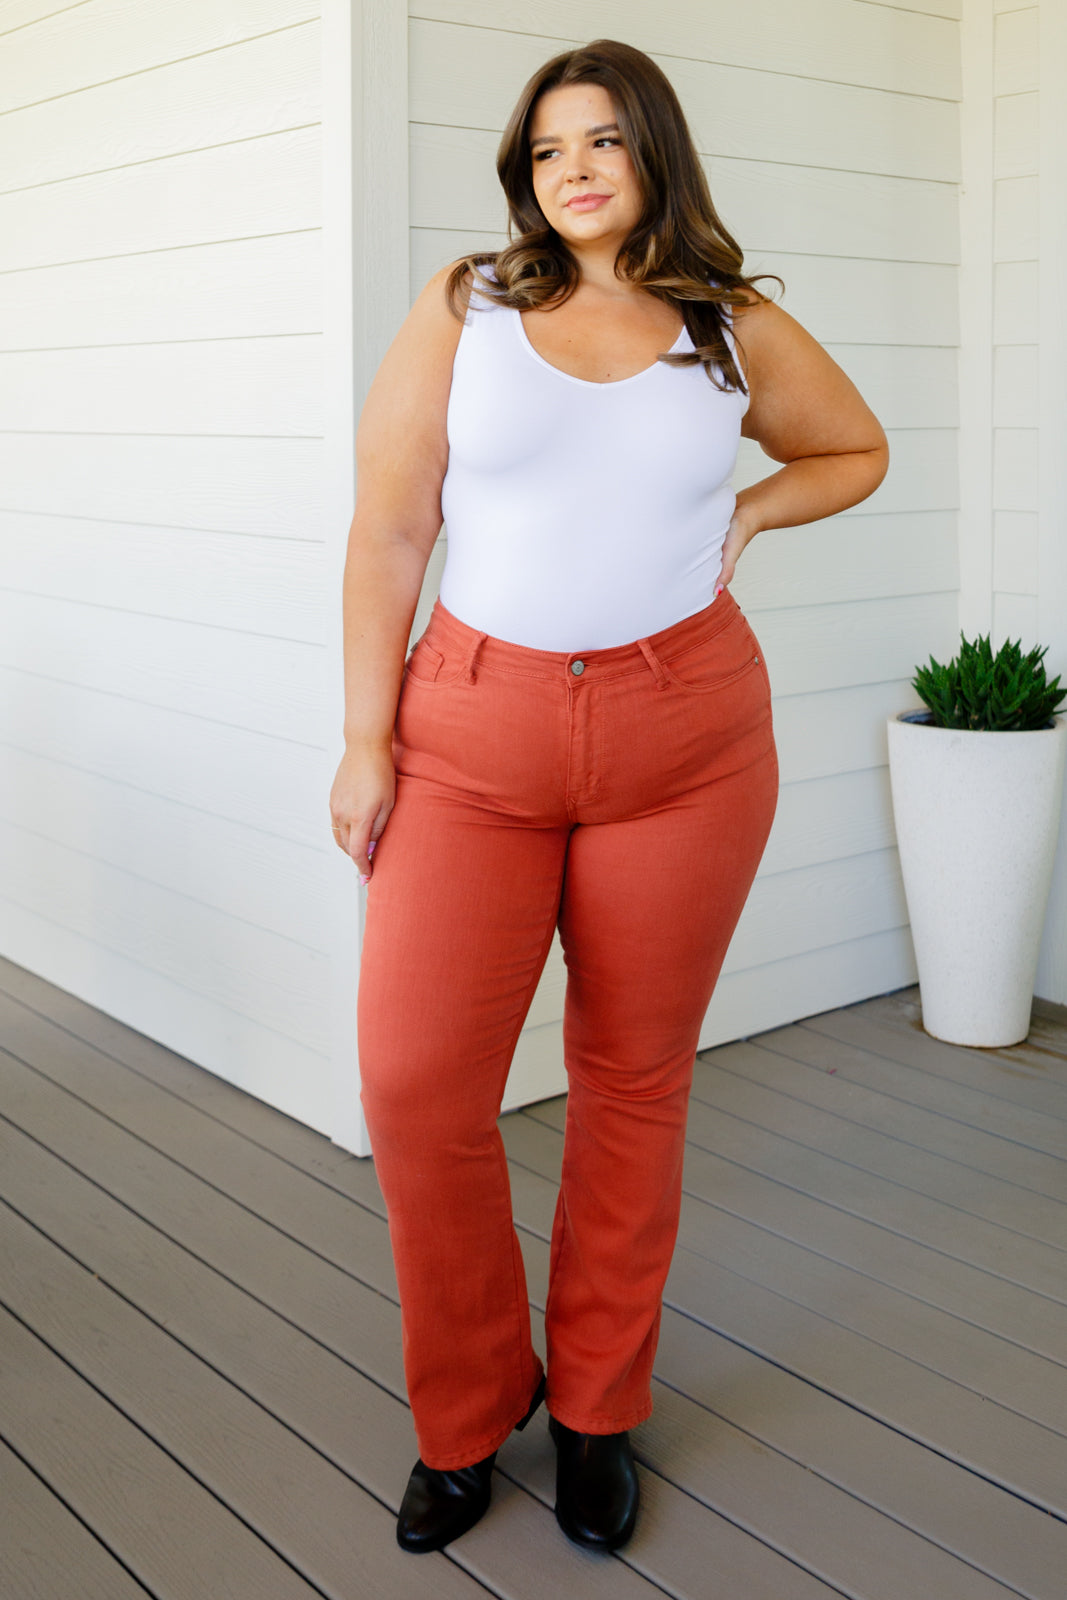 Autumn Mid Rise Slim Bootcut Jeans in Terracotta - AnnRose Boutique